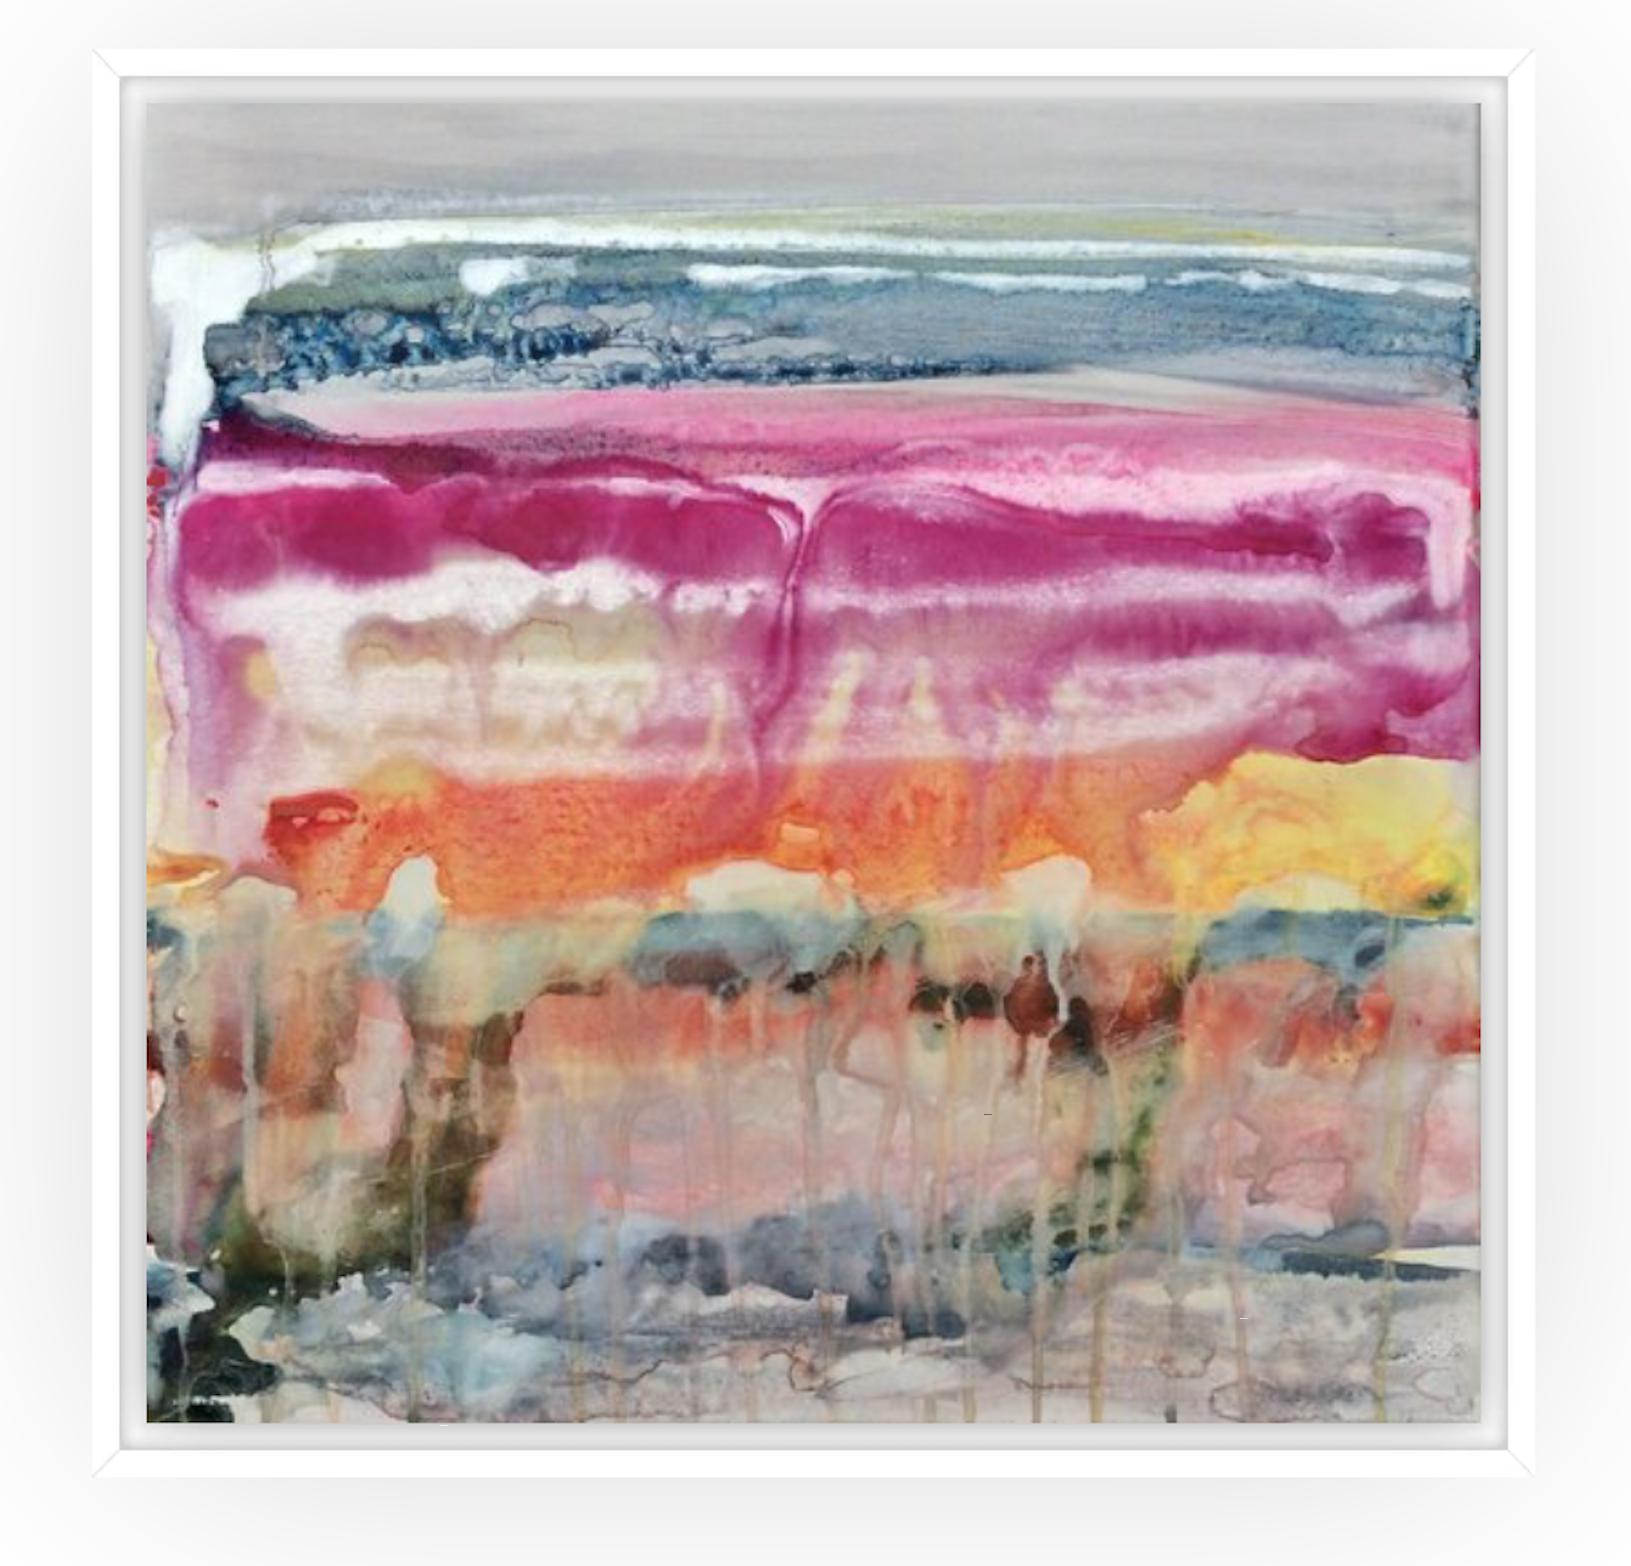 An abstract contemporary mixed media watercolor on canvas. This painting shows lots of thin colorful layers, giving it a dreamy but powerful atmosphere. The colors are partly handmixed and extra silver pigments add some special sparkle when hit by